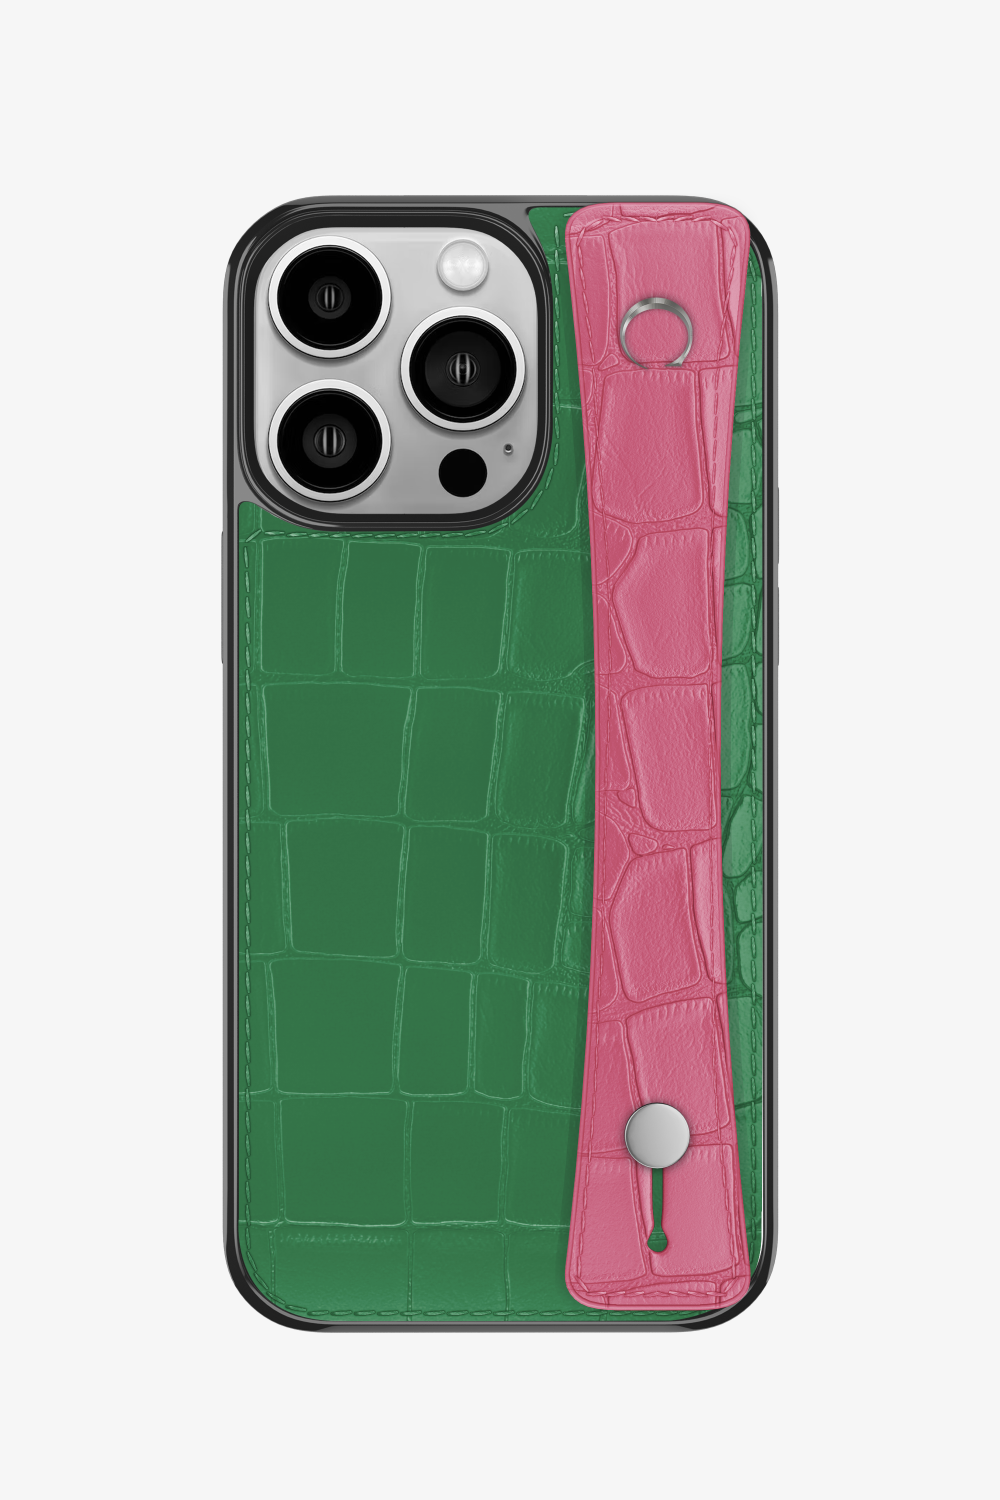 Alligator Sports Strap Case for iPhone 14 Pro - Green Emerald / Pink - zollofrance